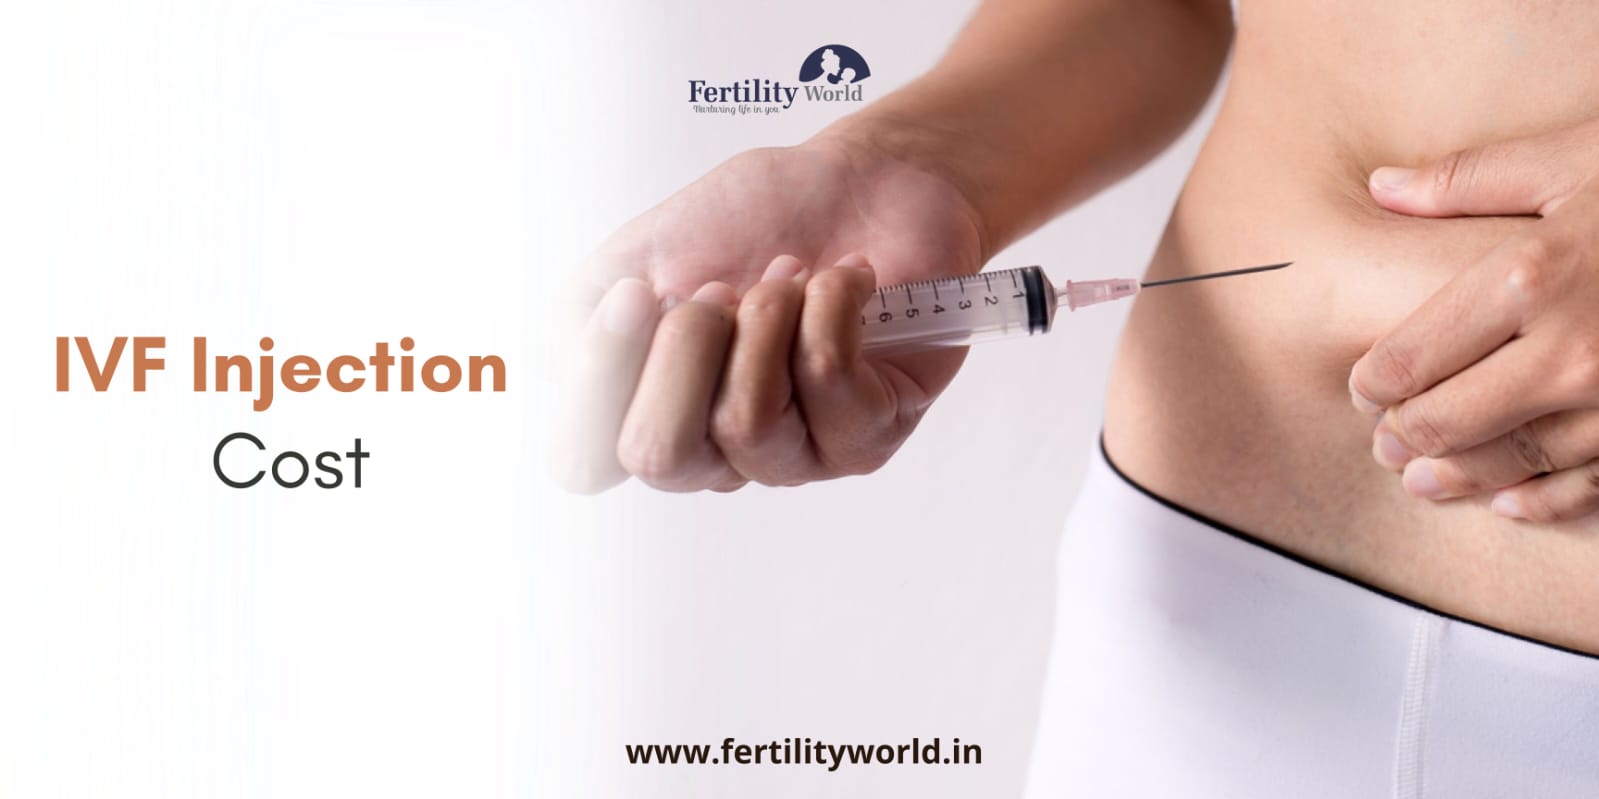 What is the IVF injections cost in Ghaziabad?